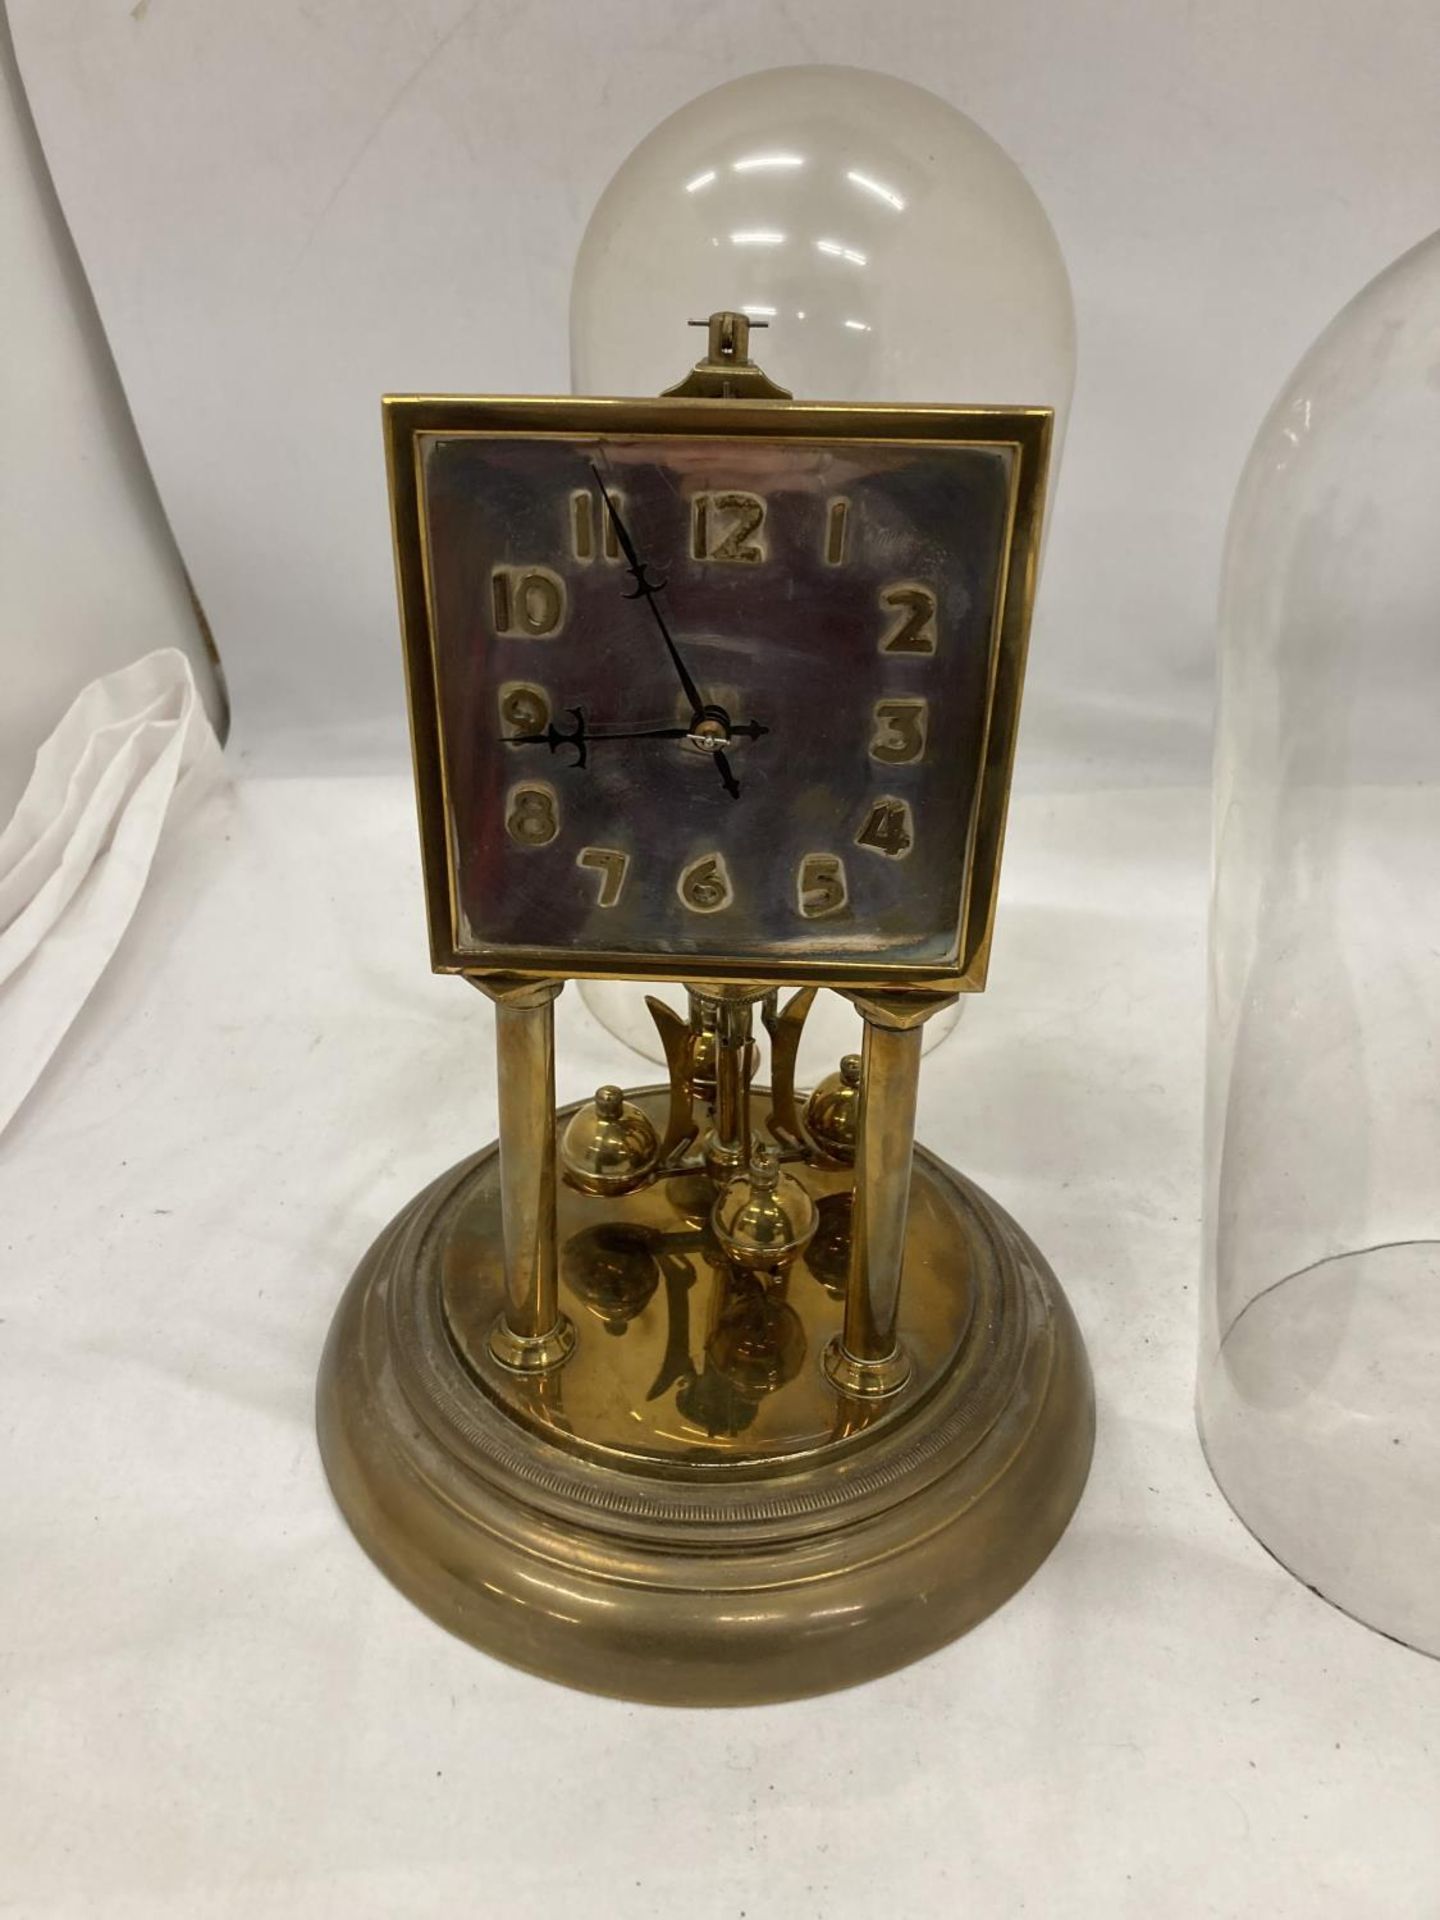 A VINTAGE SQUARE FACED ANNIVERSARY CLOCK WITH GLASS DOME AND A FURTHER DOME - Image 3 of 4